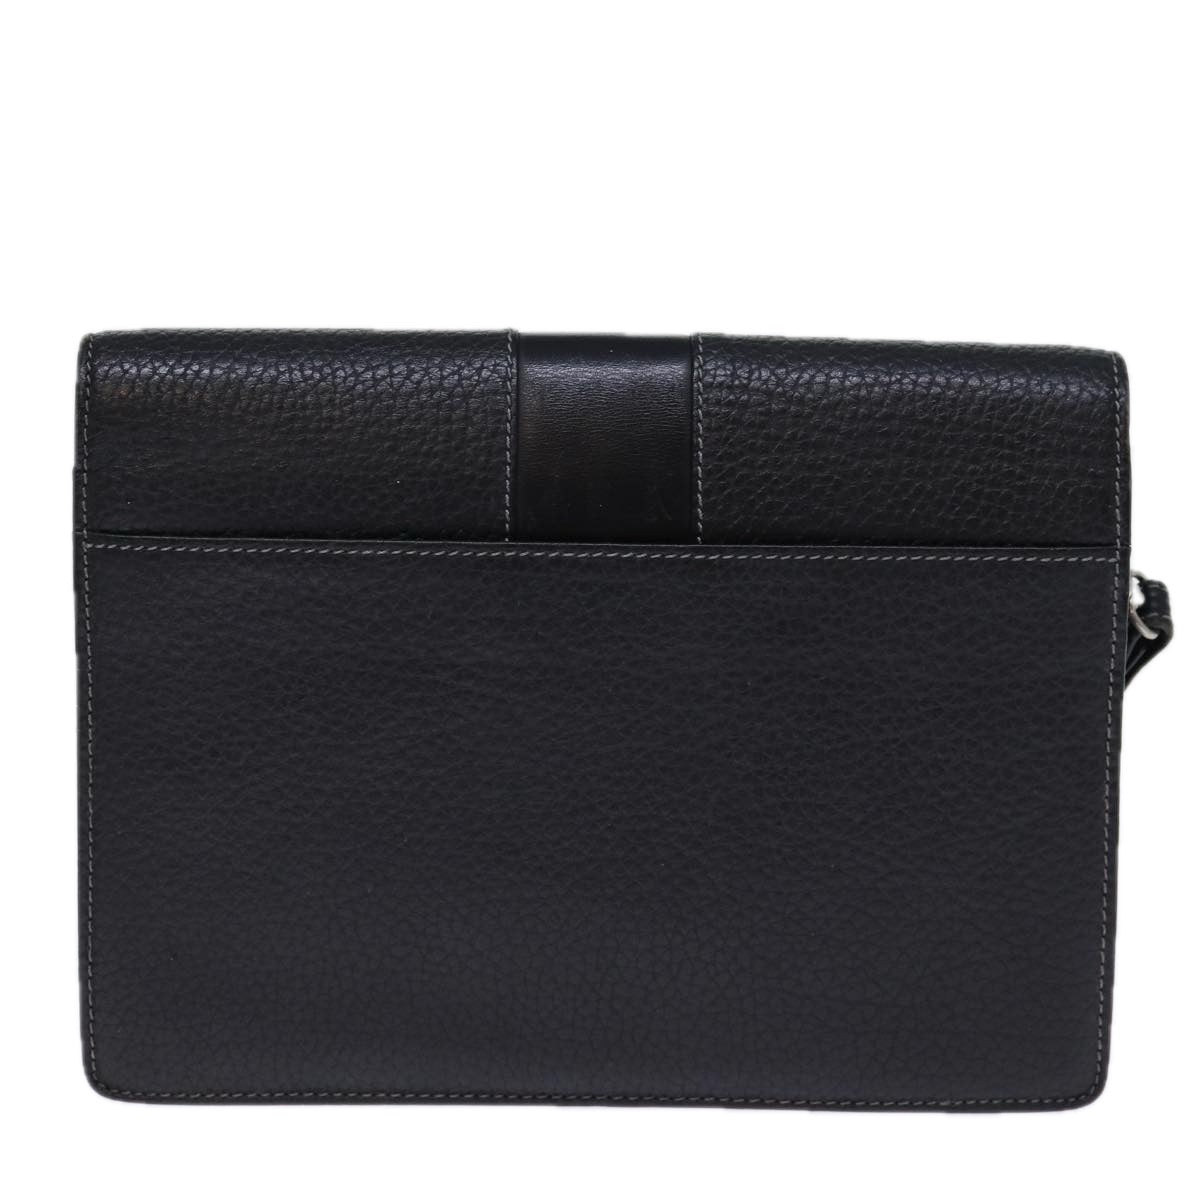 Burberrys Clutch Bag Leather Black Auth bs13915 - 0